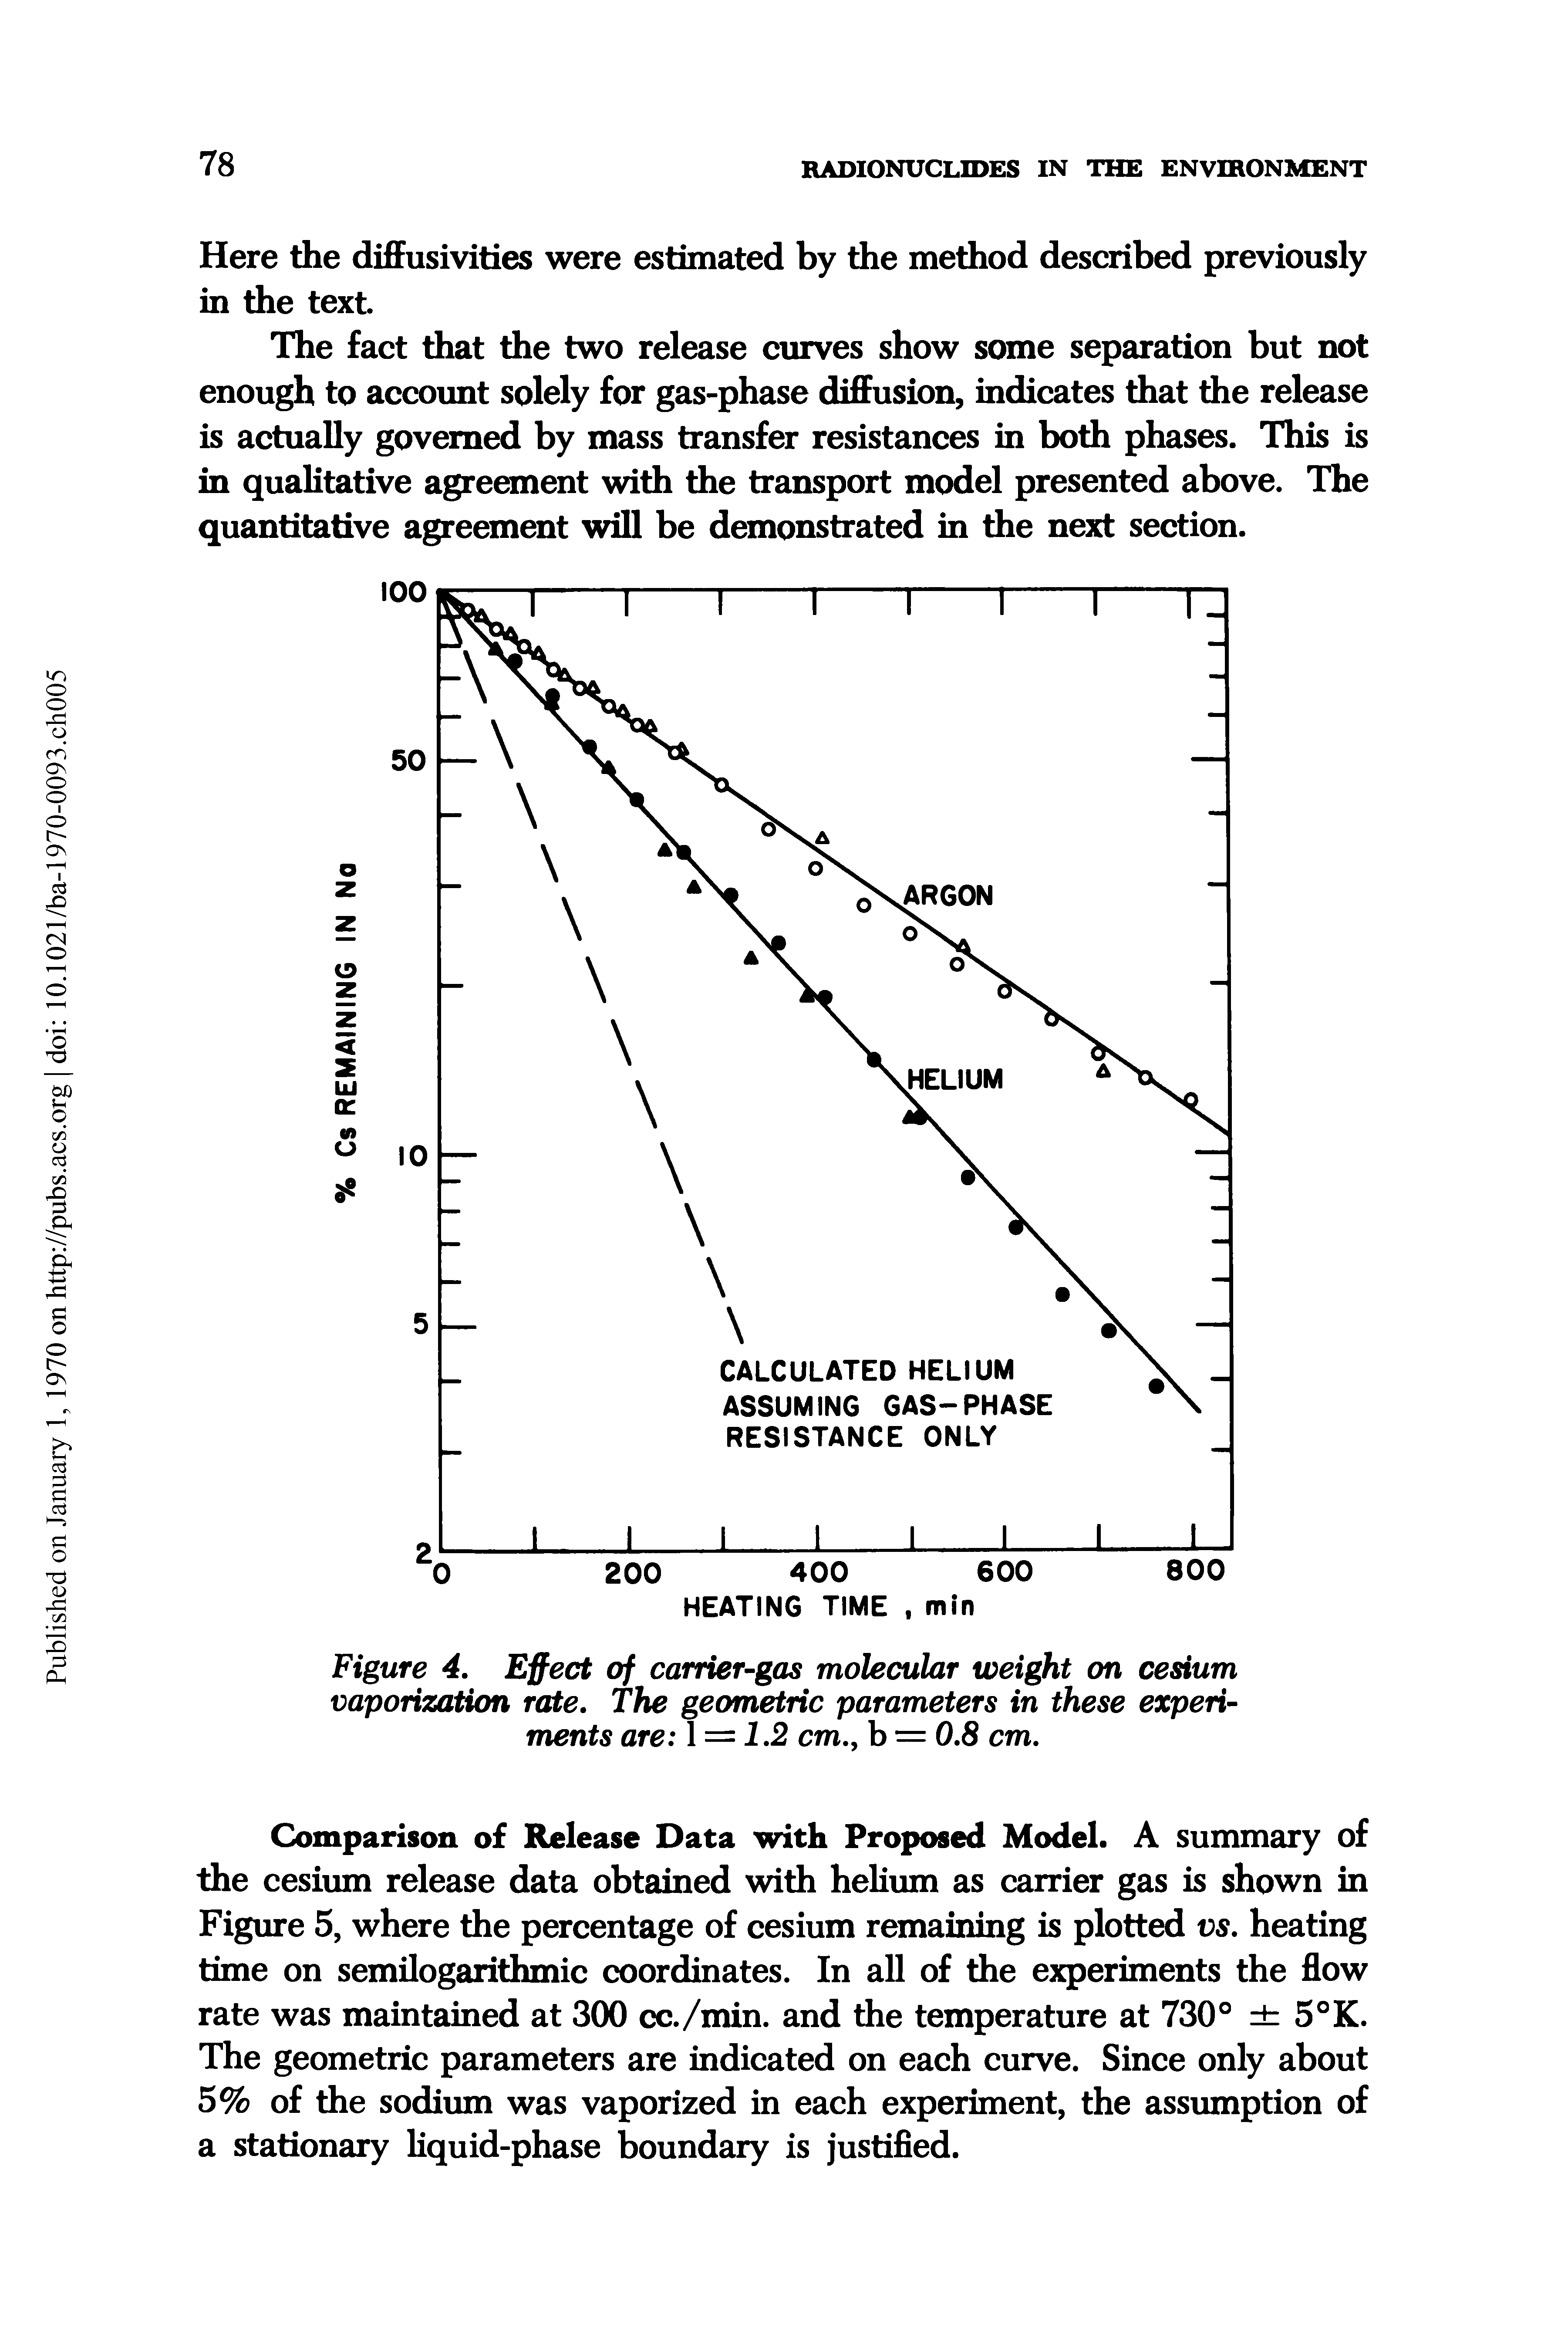 Figure 4. Effect of carrier-gas molecular weight on cesium vaporization rate. The geometric parameters in these experiments are = 1,2 cm., b = 0,8 cm.